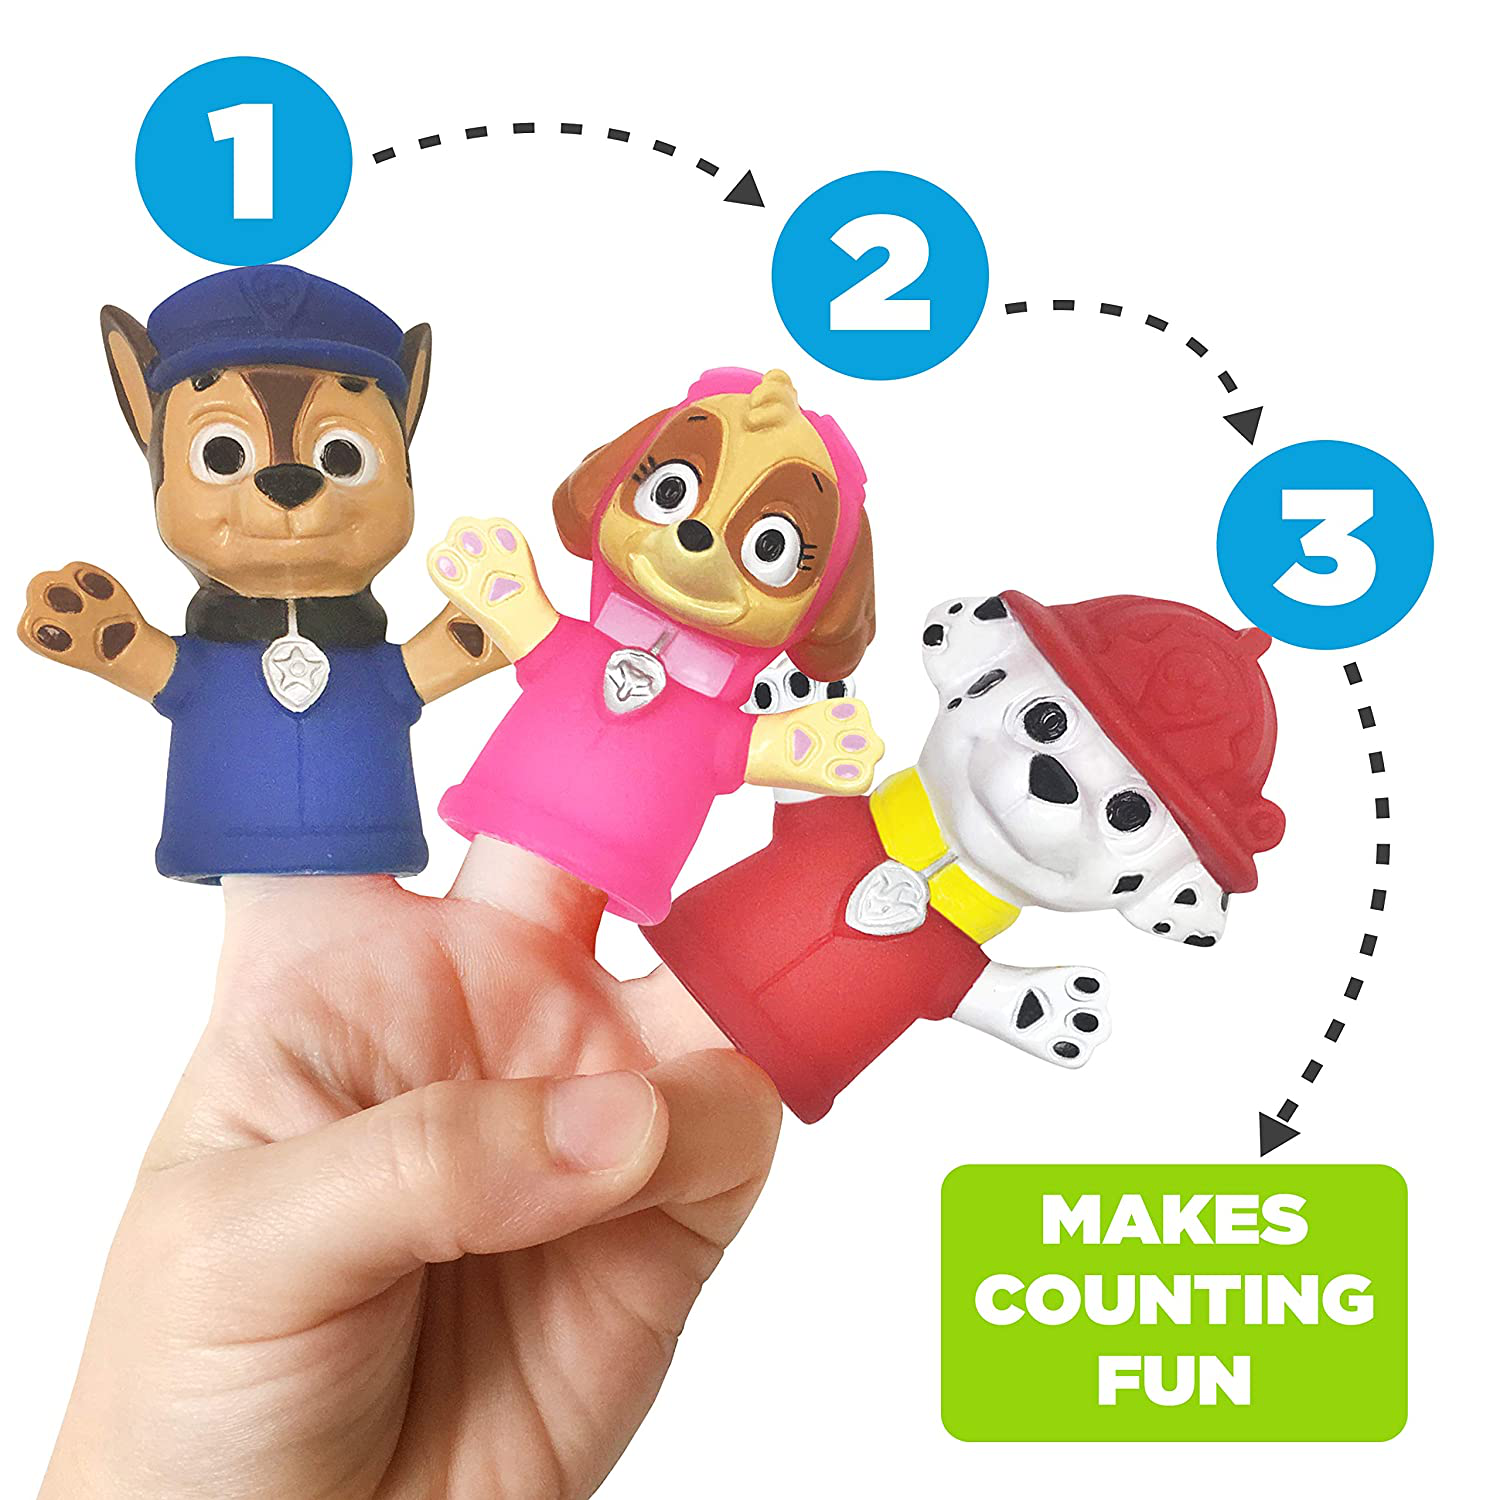 Nickelodeon Paw Patrol Finger Puppets - Party Favors, Educational, Bath Toys